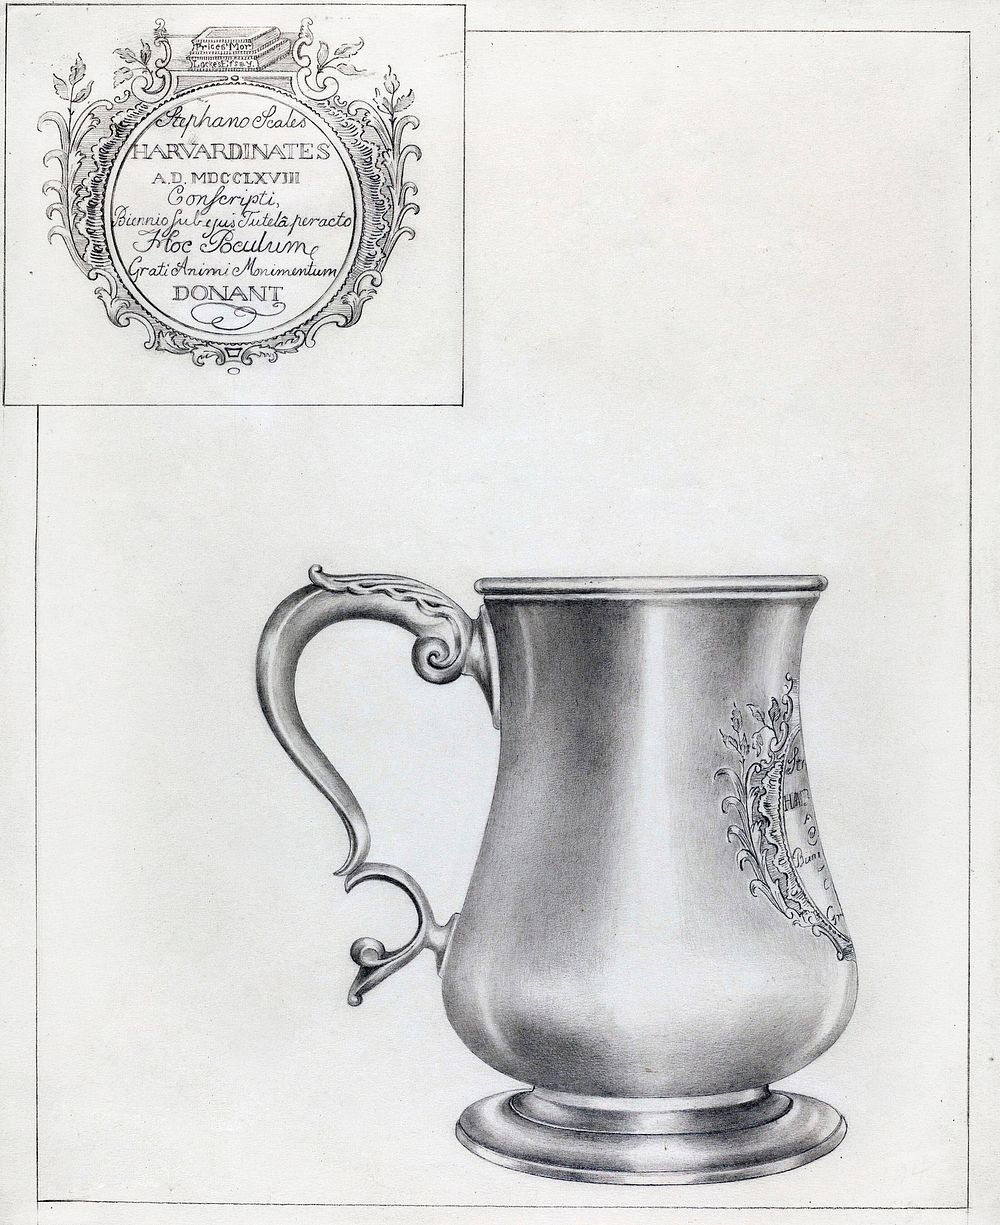 Silver Mug (ca.1937) by Hester Duany. Original from The National Gallery of Art. Digitally enhanced by rawpixel.